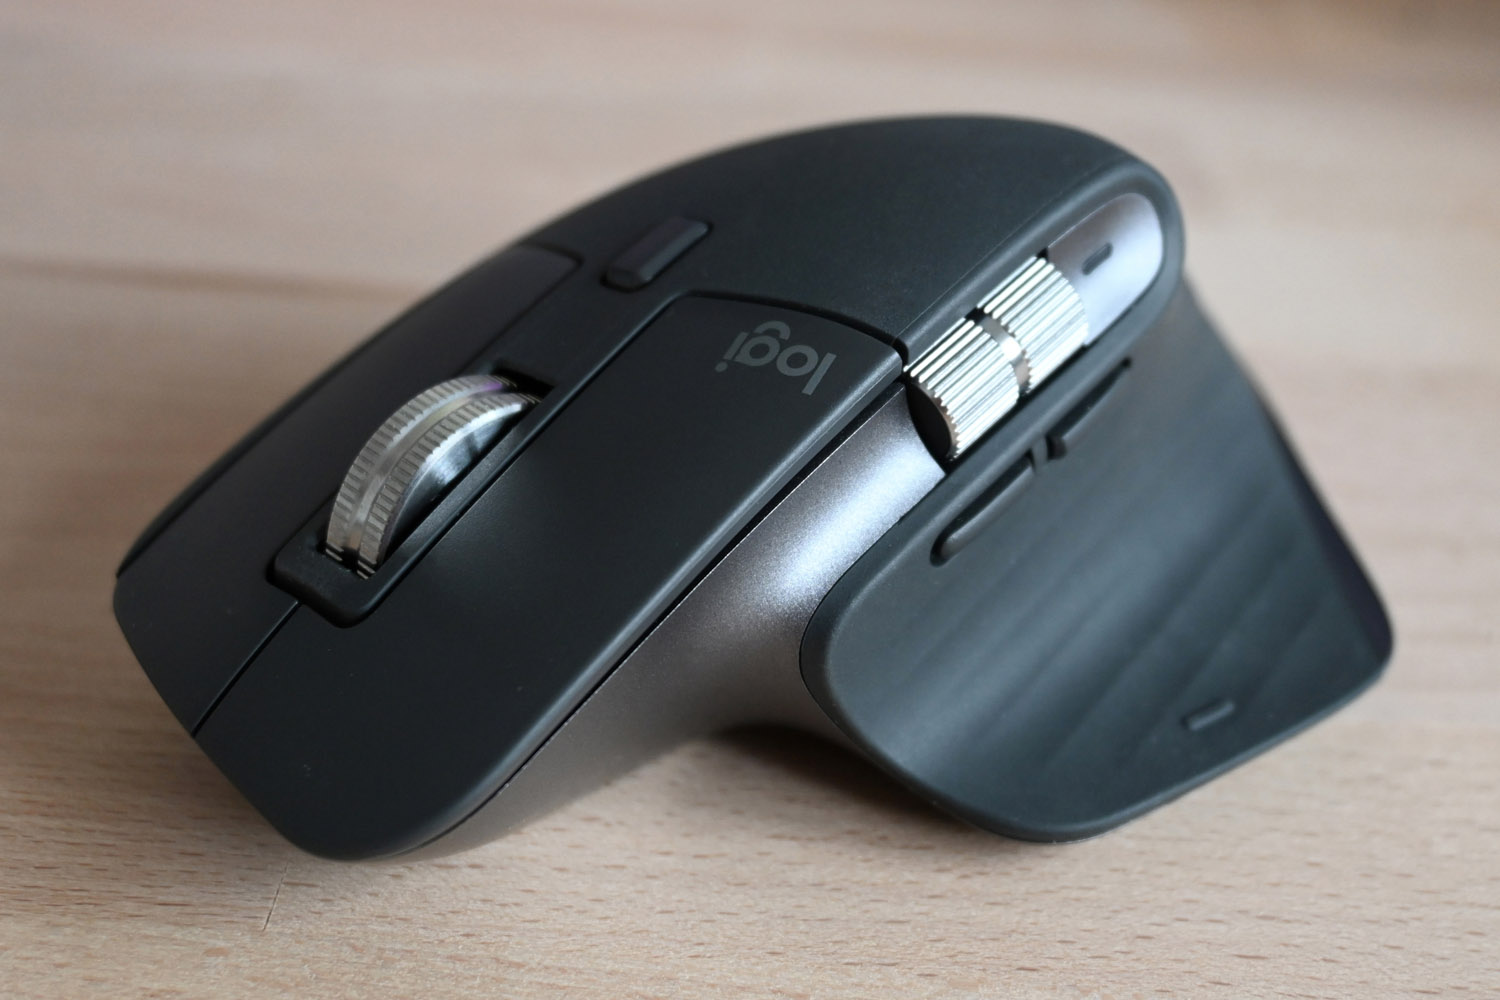 Logitech MX Master 3 Review: A Wireless Mouse Built for